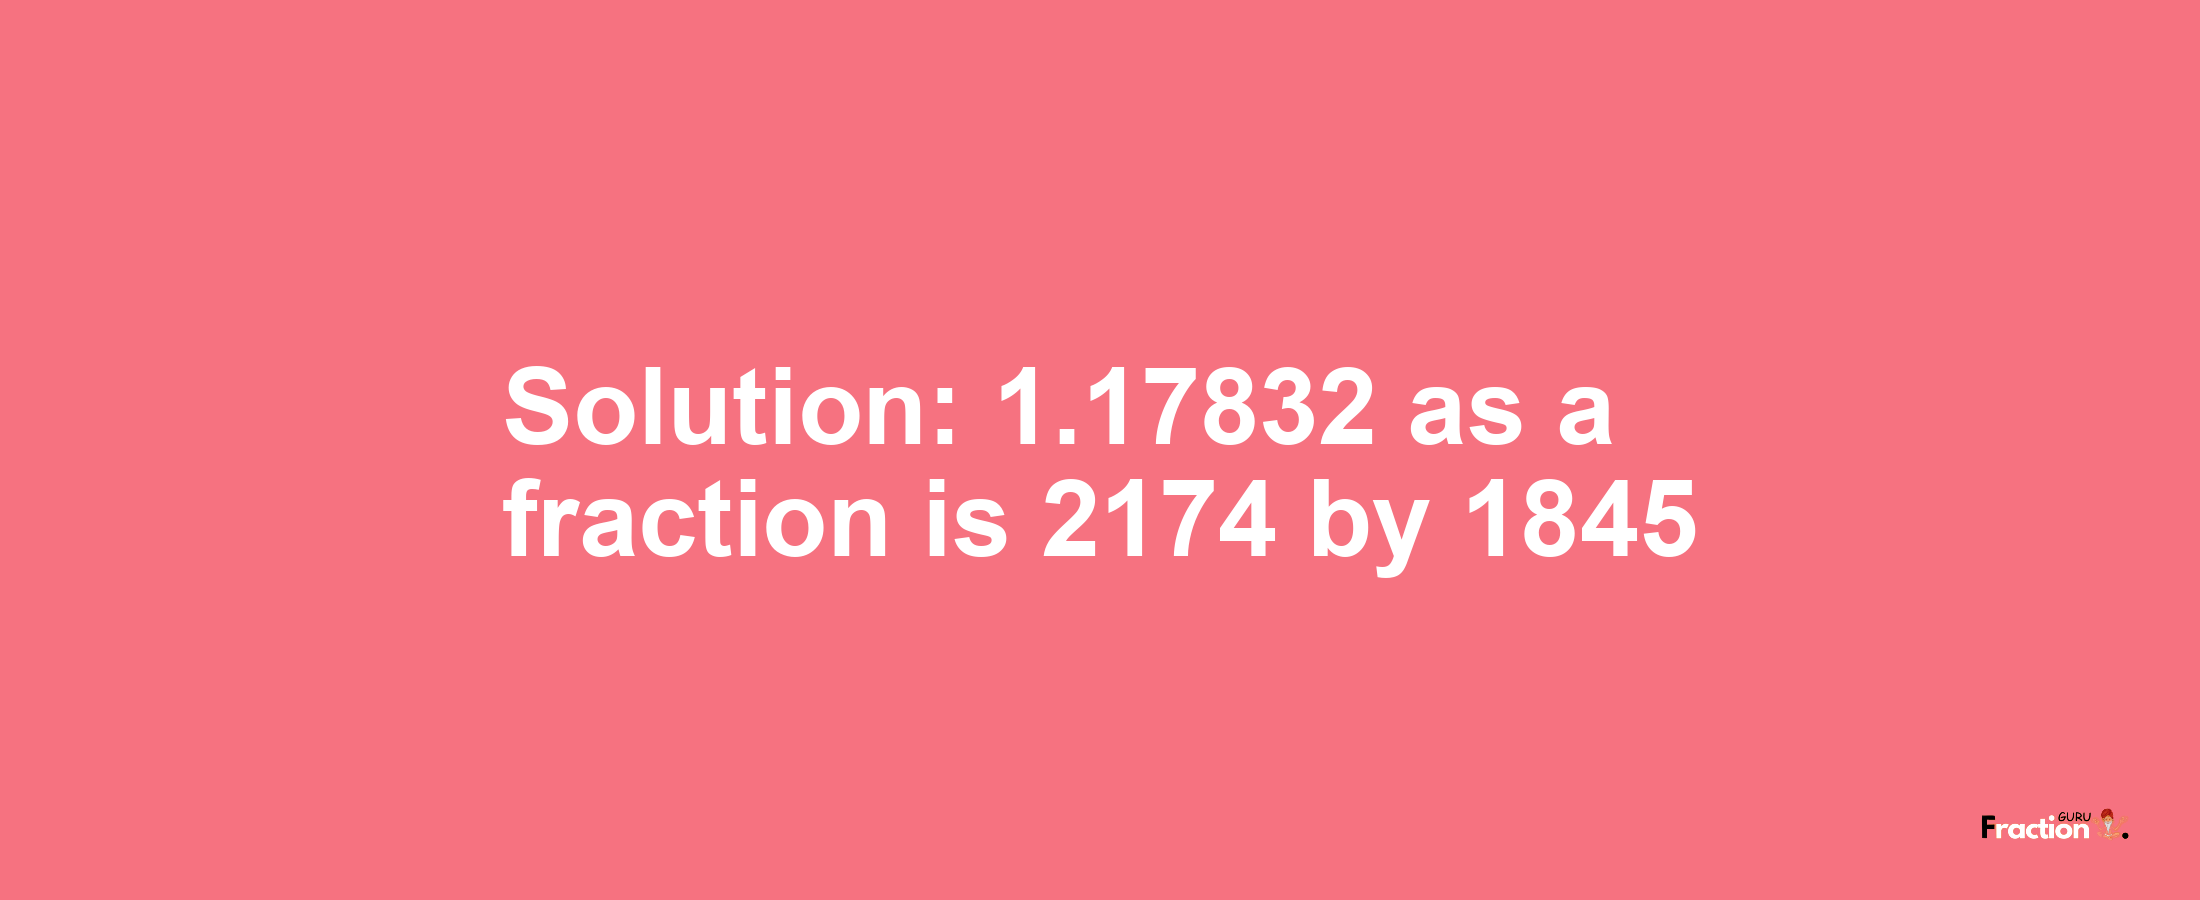 Solution:1.17832 as a fraction is 2174/1845